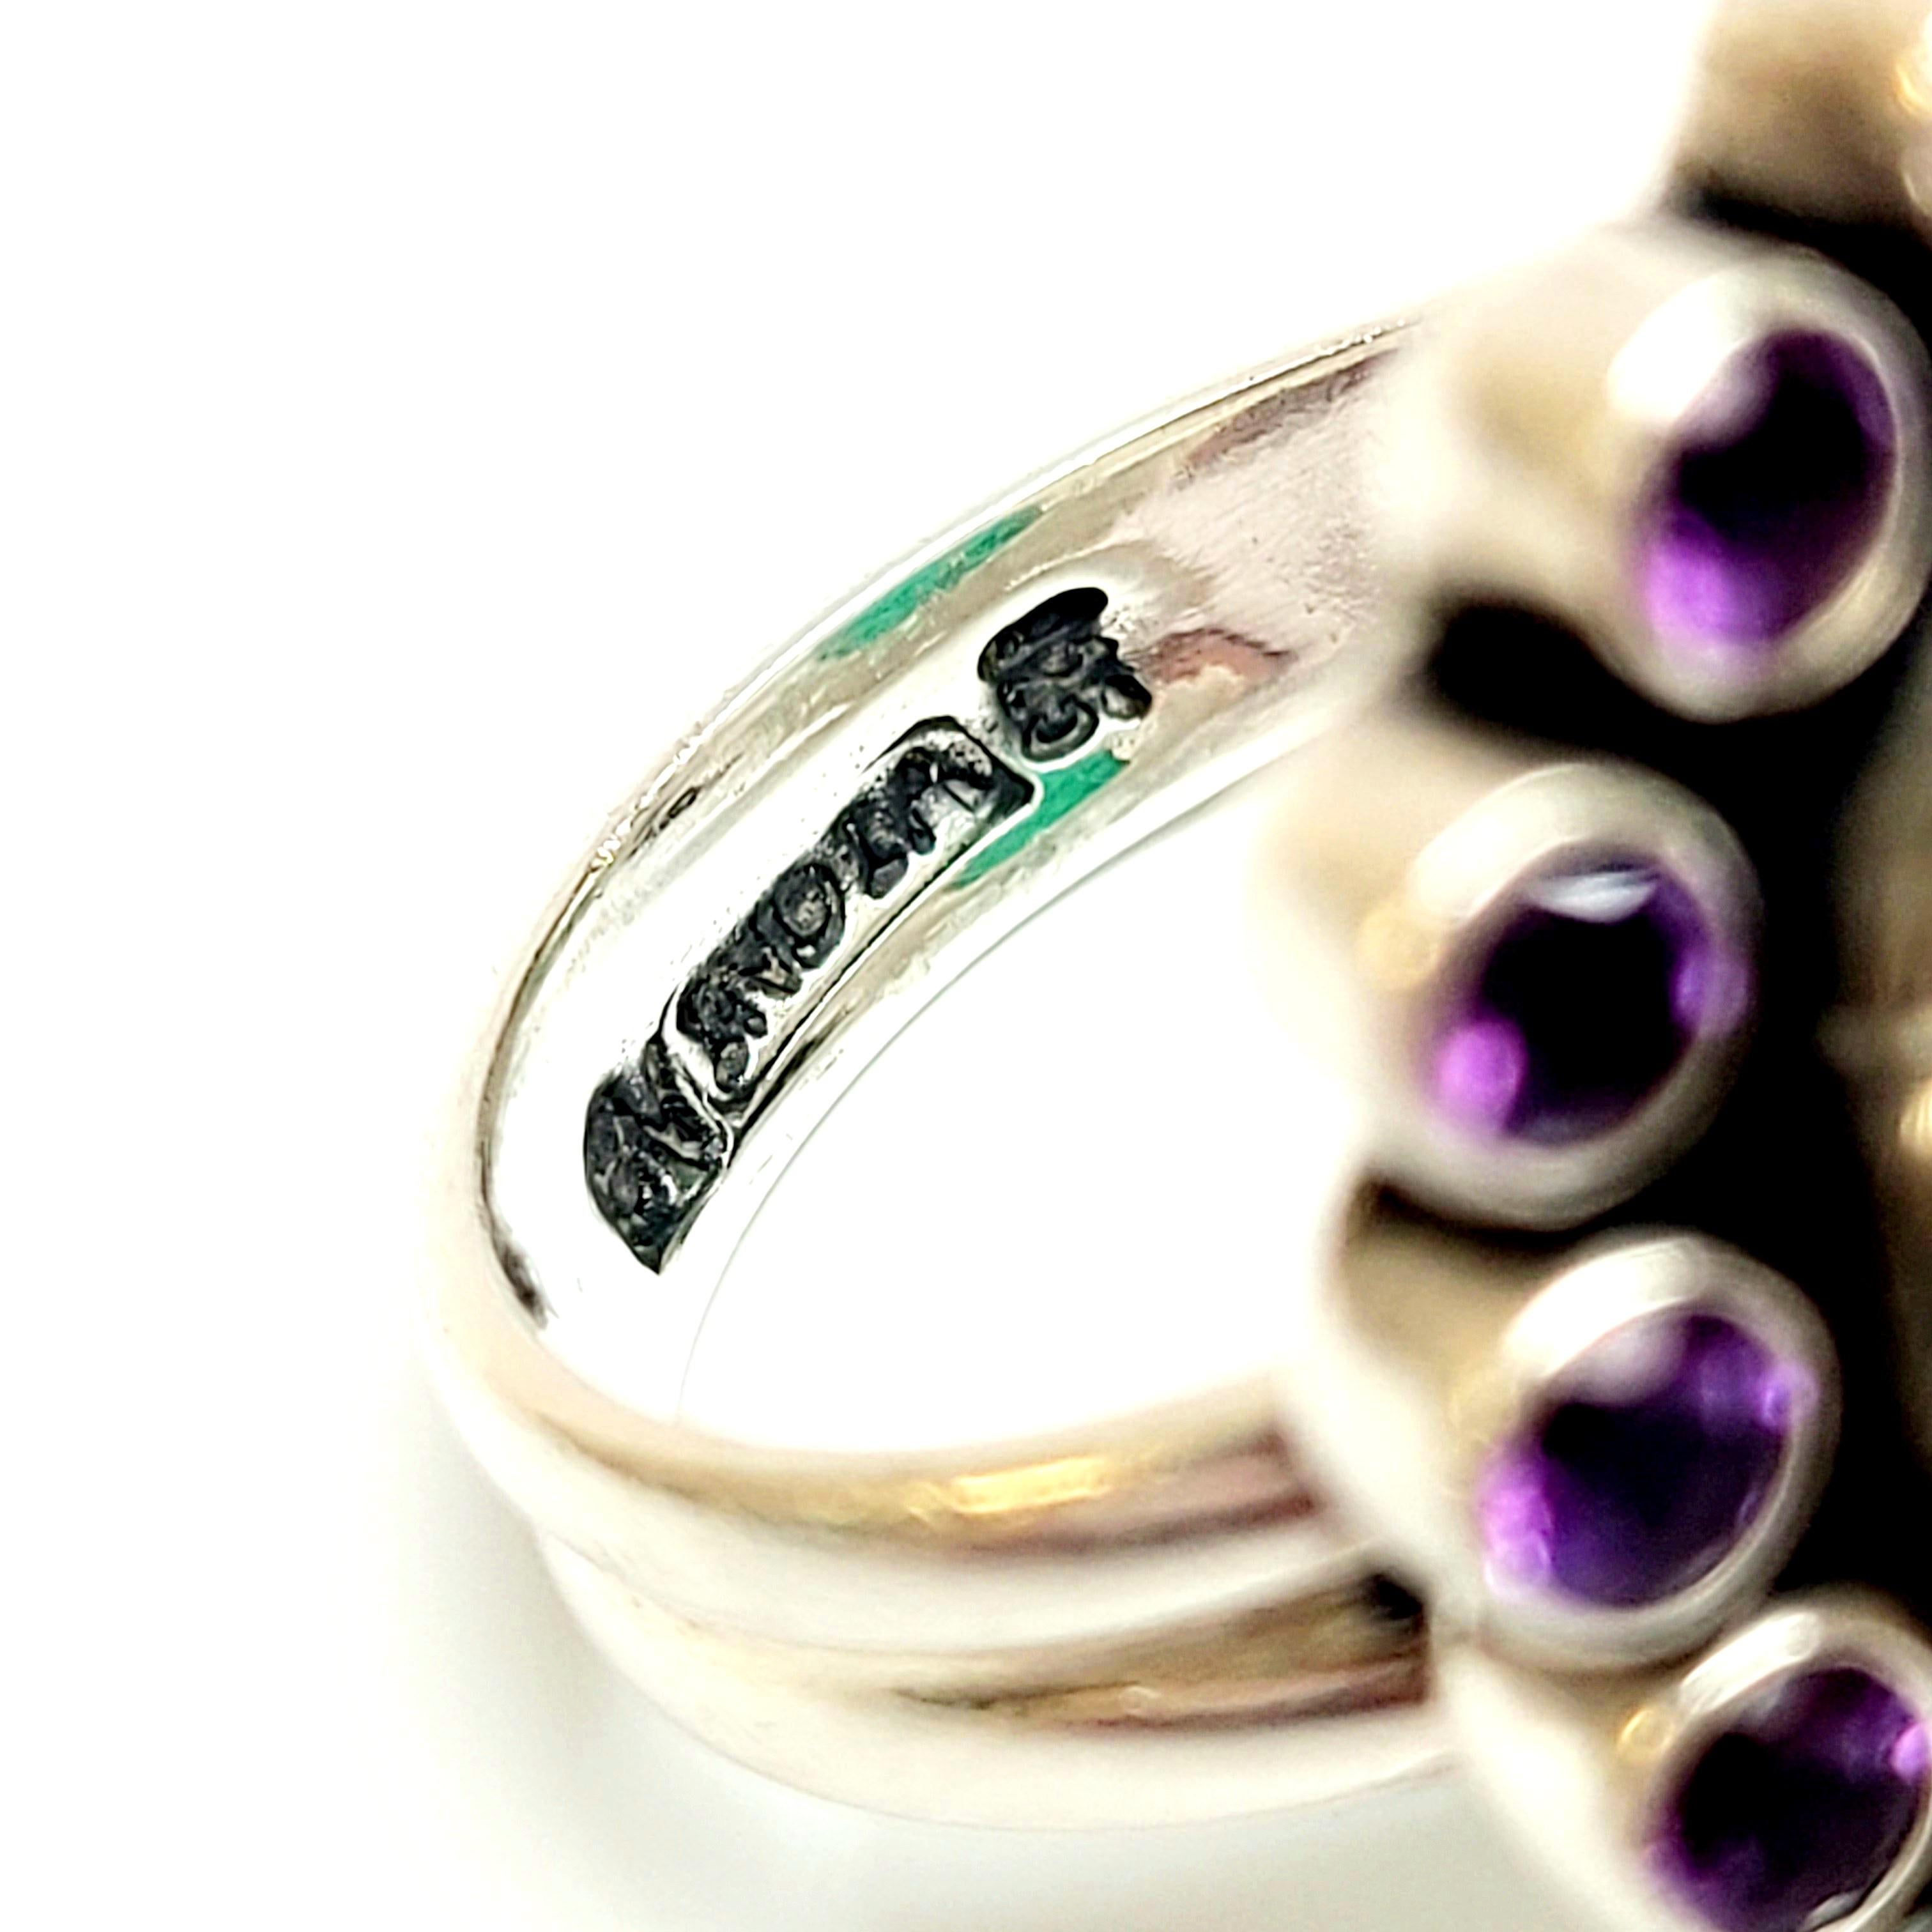 Nicky Butler sterling silver, green chalcedony and purple amethyst ring.

Size 7

This is a limited edition piece from Nicky Butler's collection featuring a checkerboard faceted green chalcedony stone surrounded by round bezel set amethyst stones.